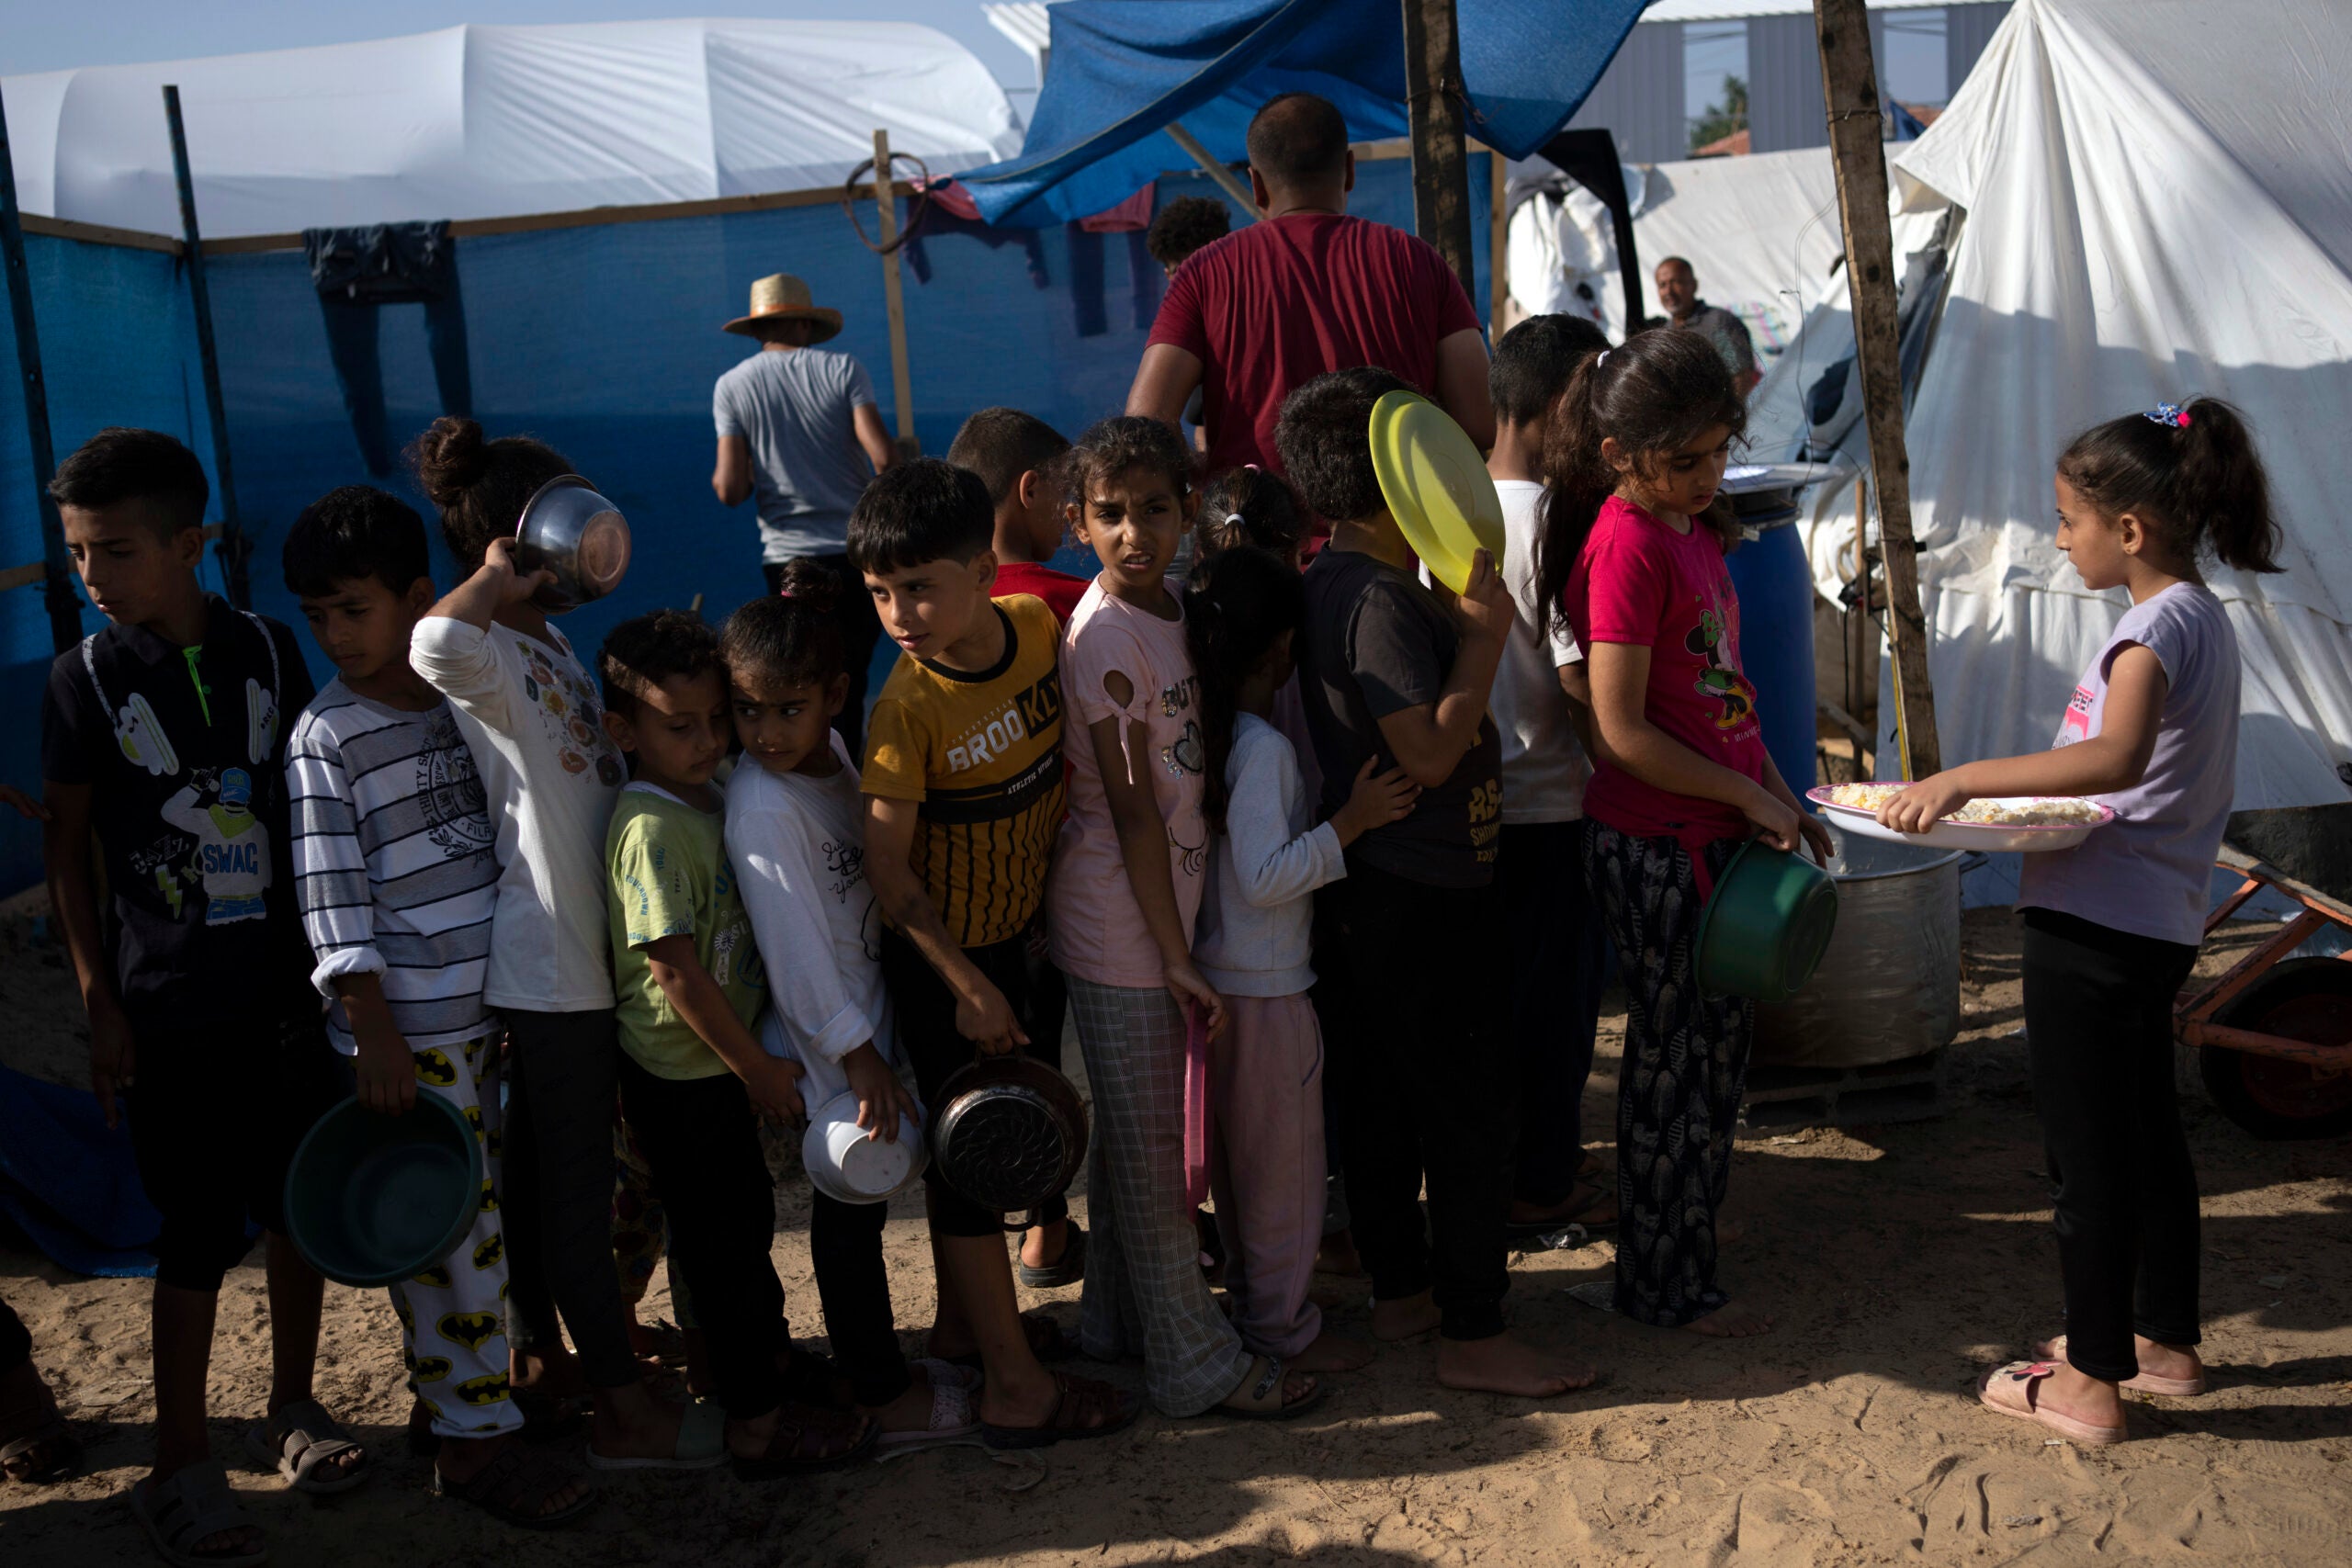 Palestinian children wait in line for a food distribution in a displaced tent camp, in Khan Younis.